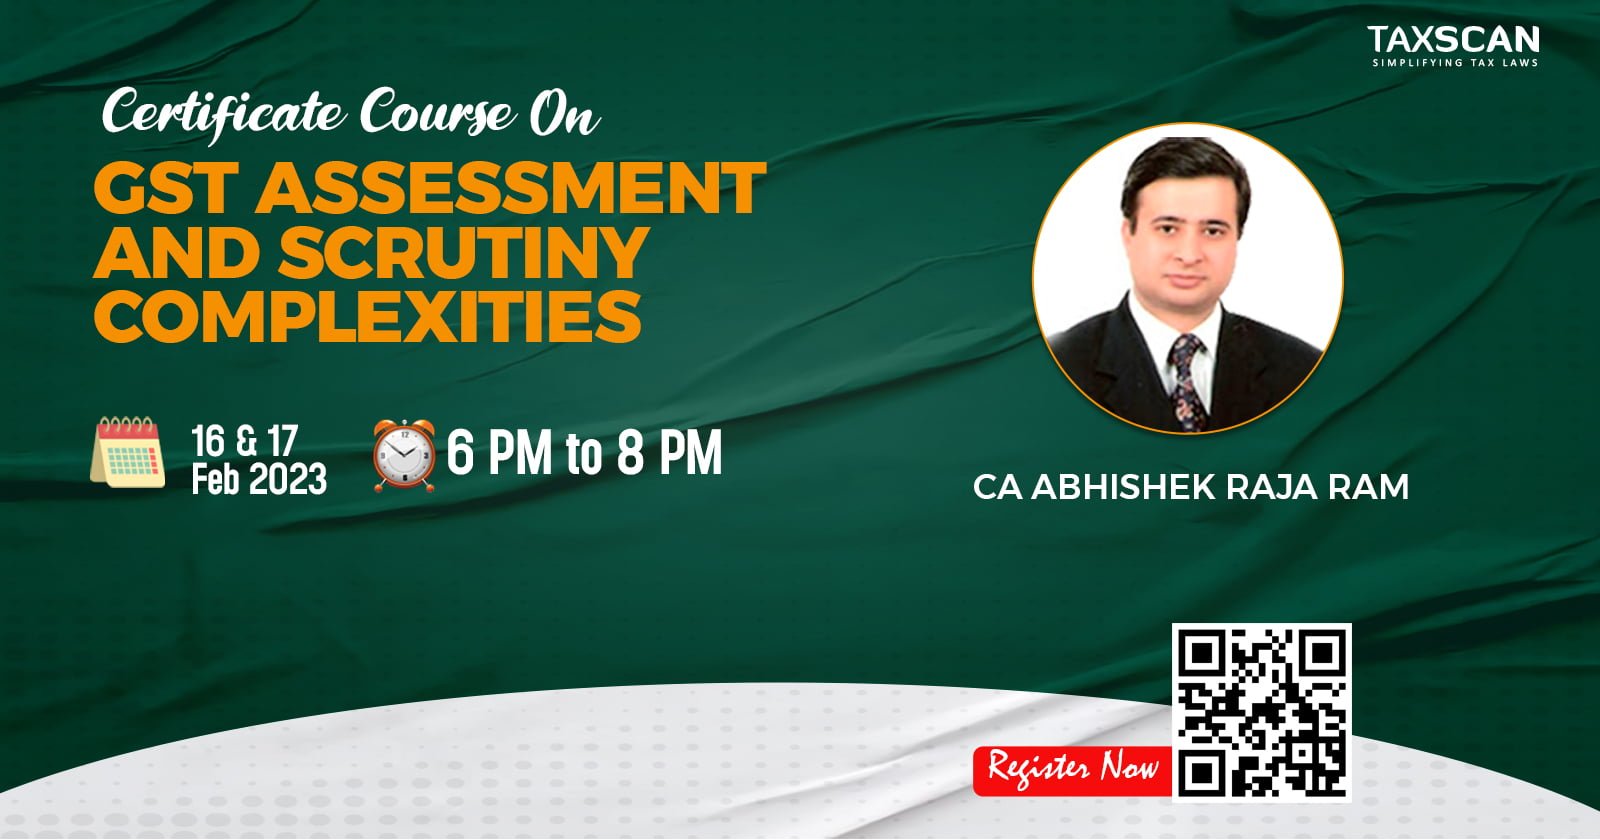 Certificate Course - GST Assessment and Scrutiny Complexities - GST Assessment - Scrutiny Complexities - GST - Assessment - online certificate course - Certificate Course 2023 - taxscan   - taxscan academy